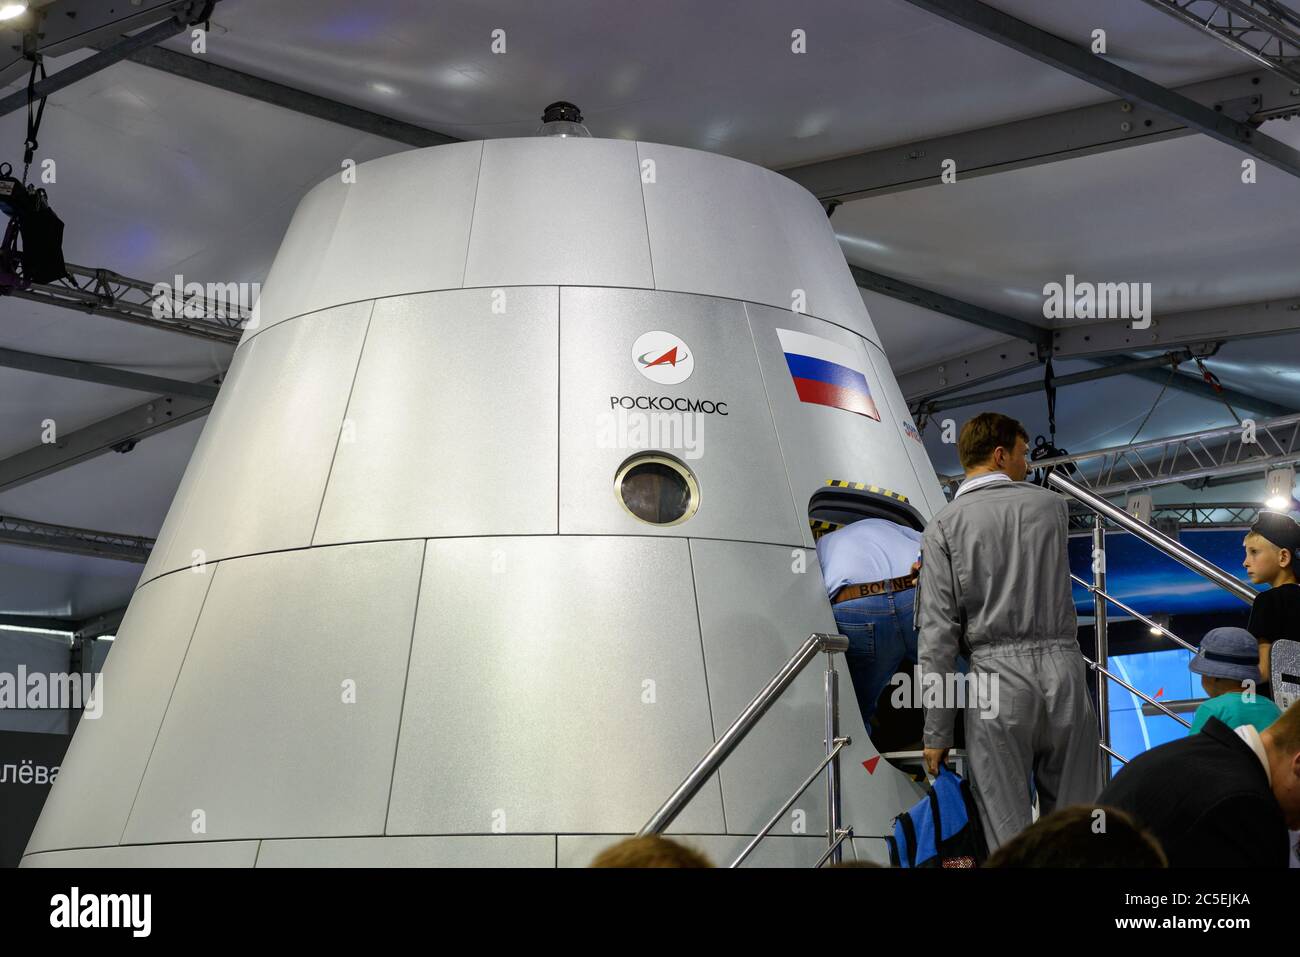 MOSCOW REGION - AUGUST 28, 2015: Russian new generation crew transportation vehicle at the International Aviation and Space Salon (MAKS) in Zhukovsky. Stock Photo